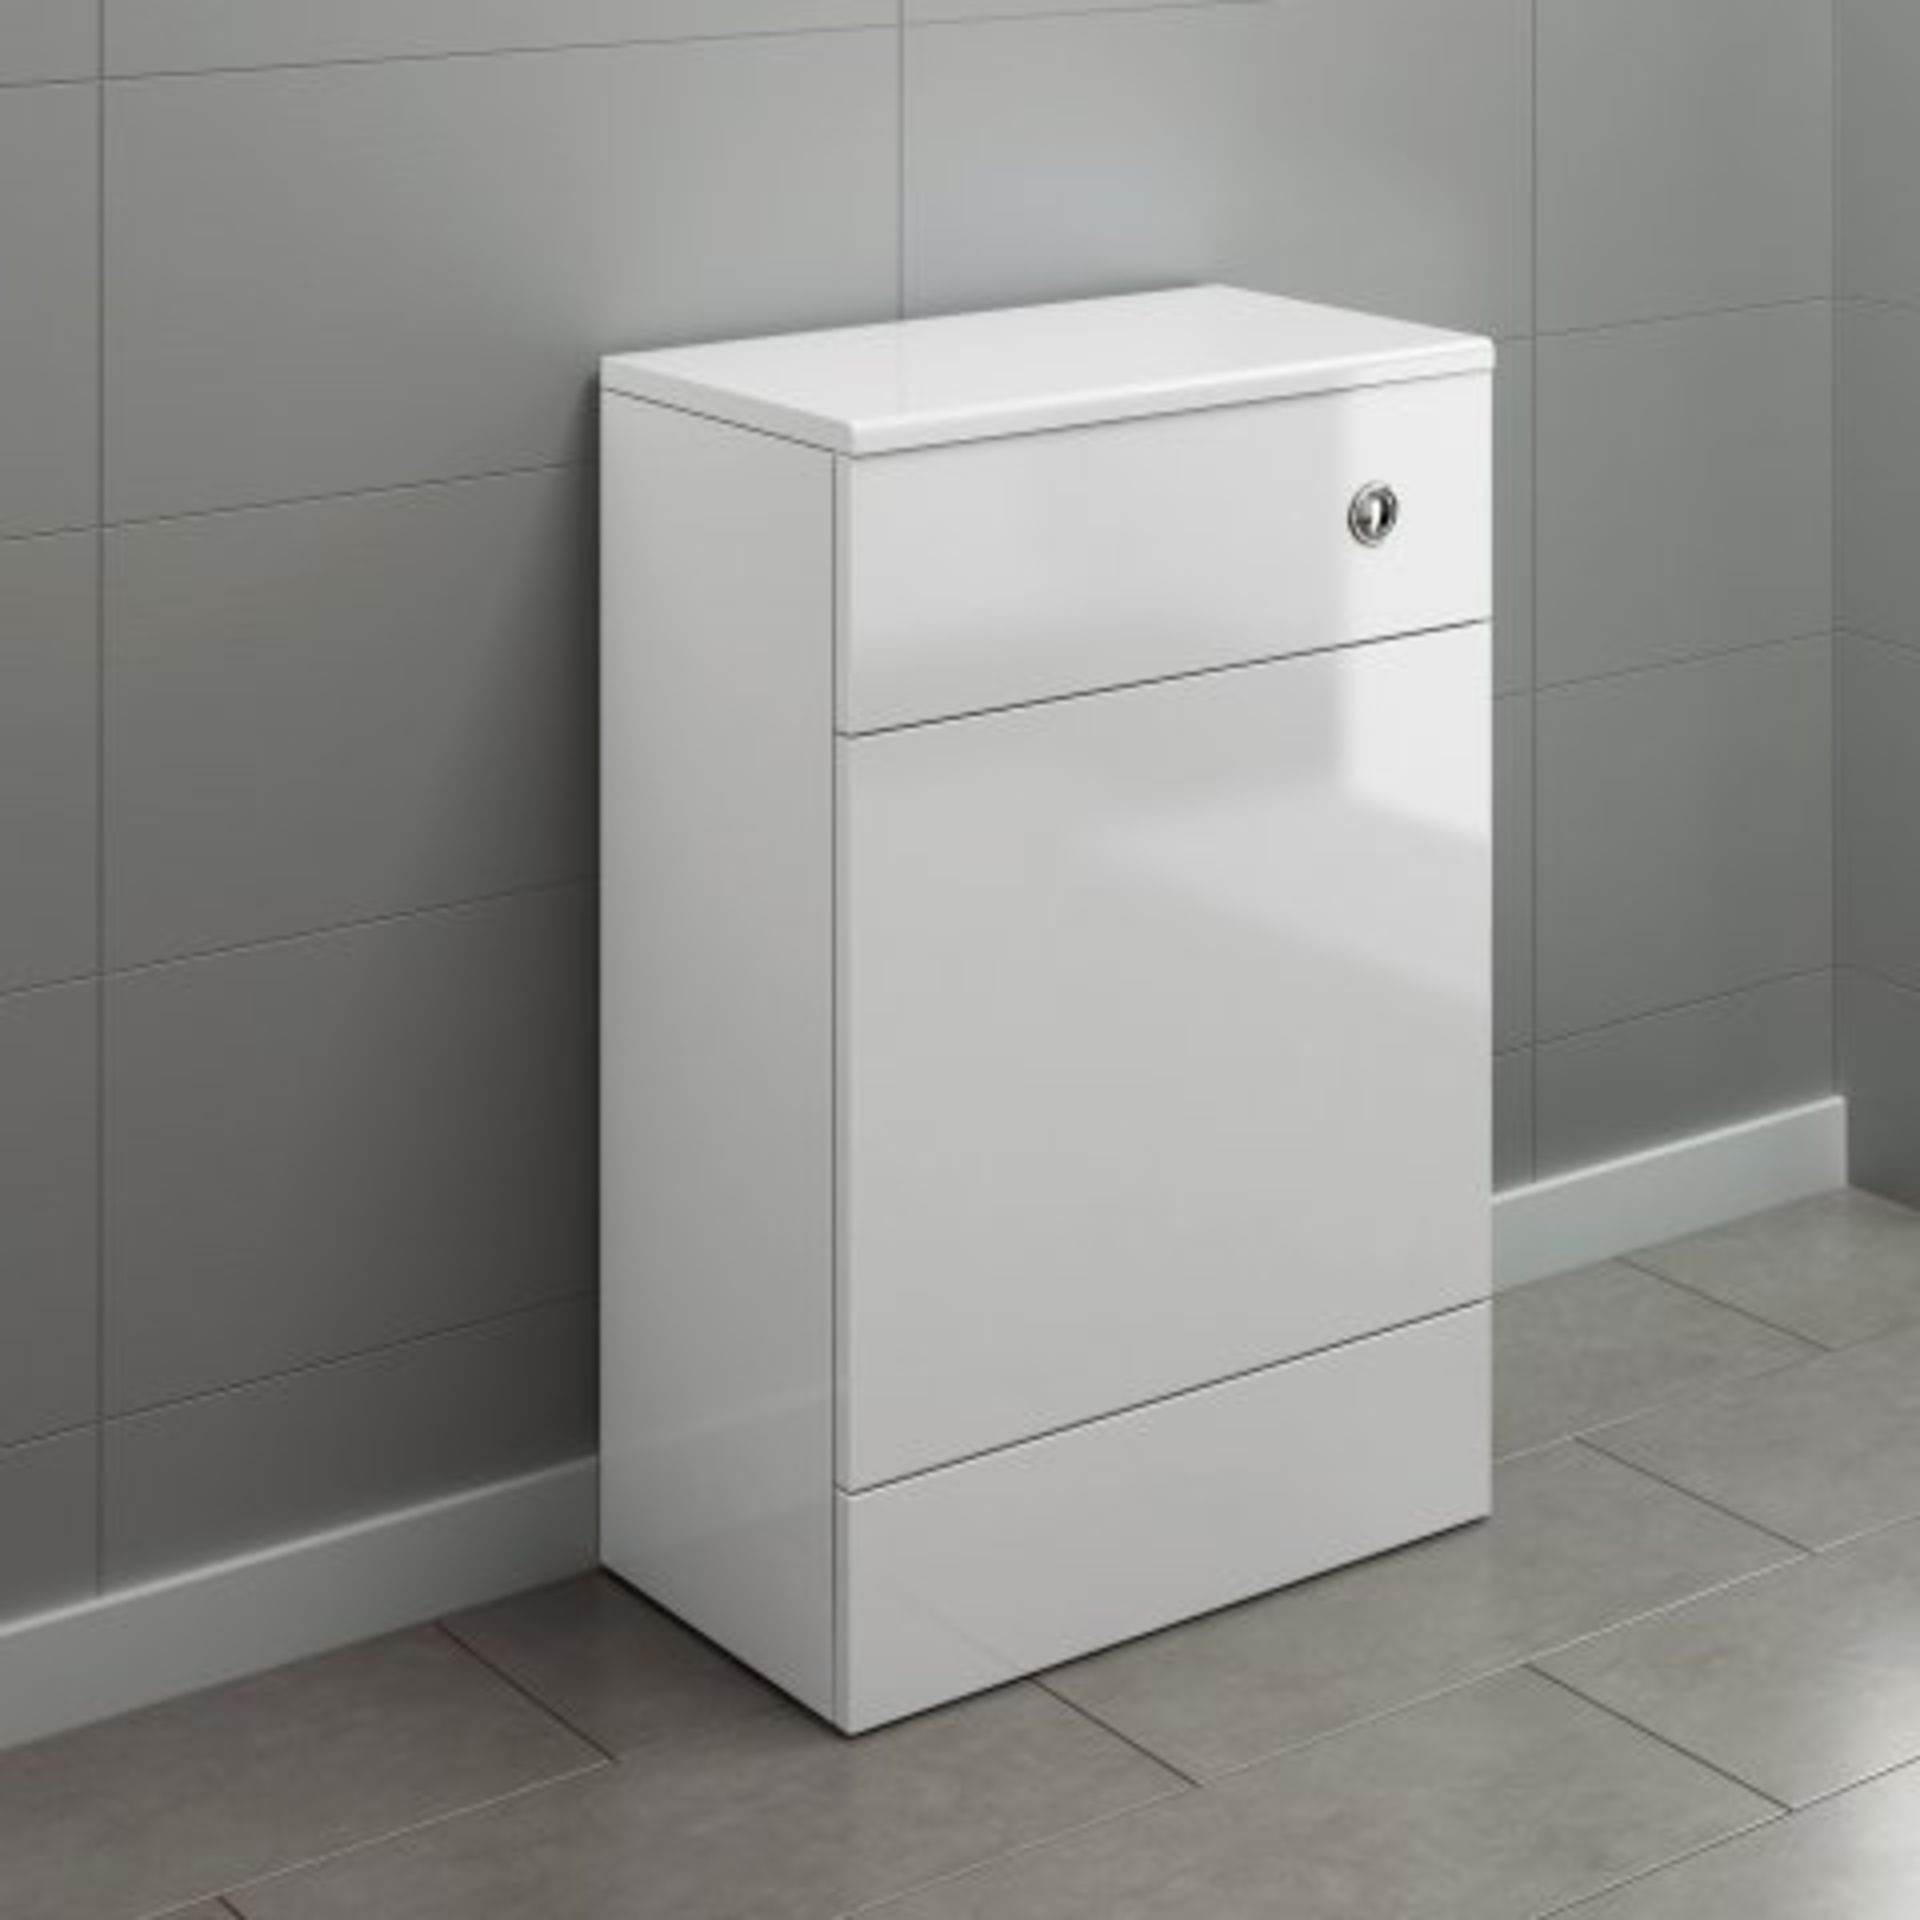 (N23) 500mm Harper Gloss White Back To Wall Toilet Unit. RRP £174.99. This practical Harper Gloss